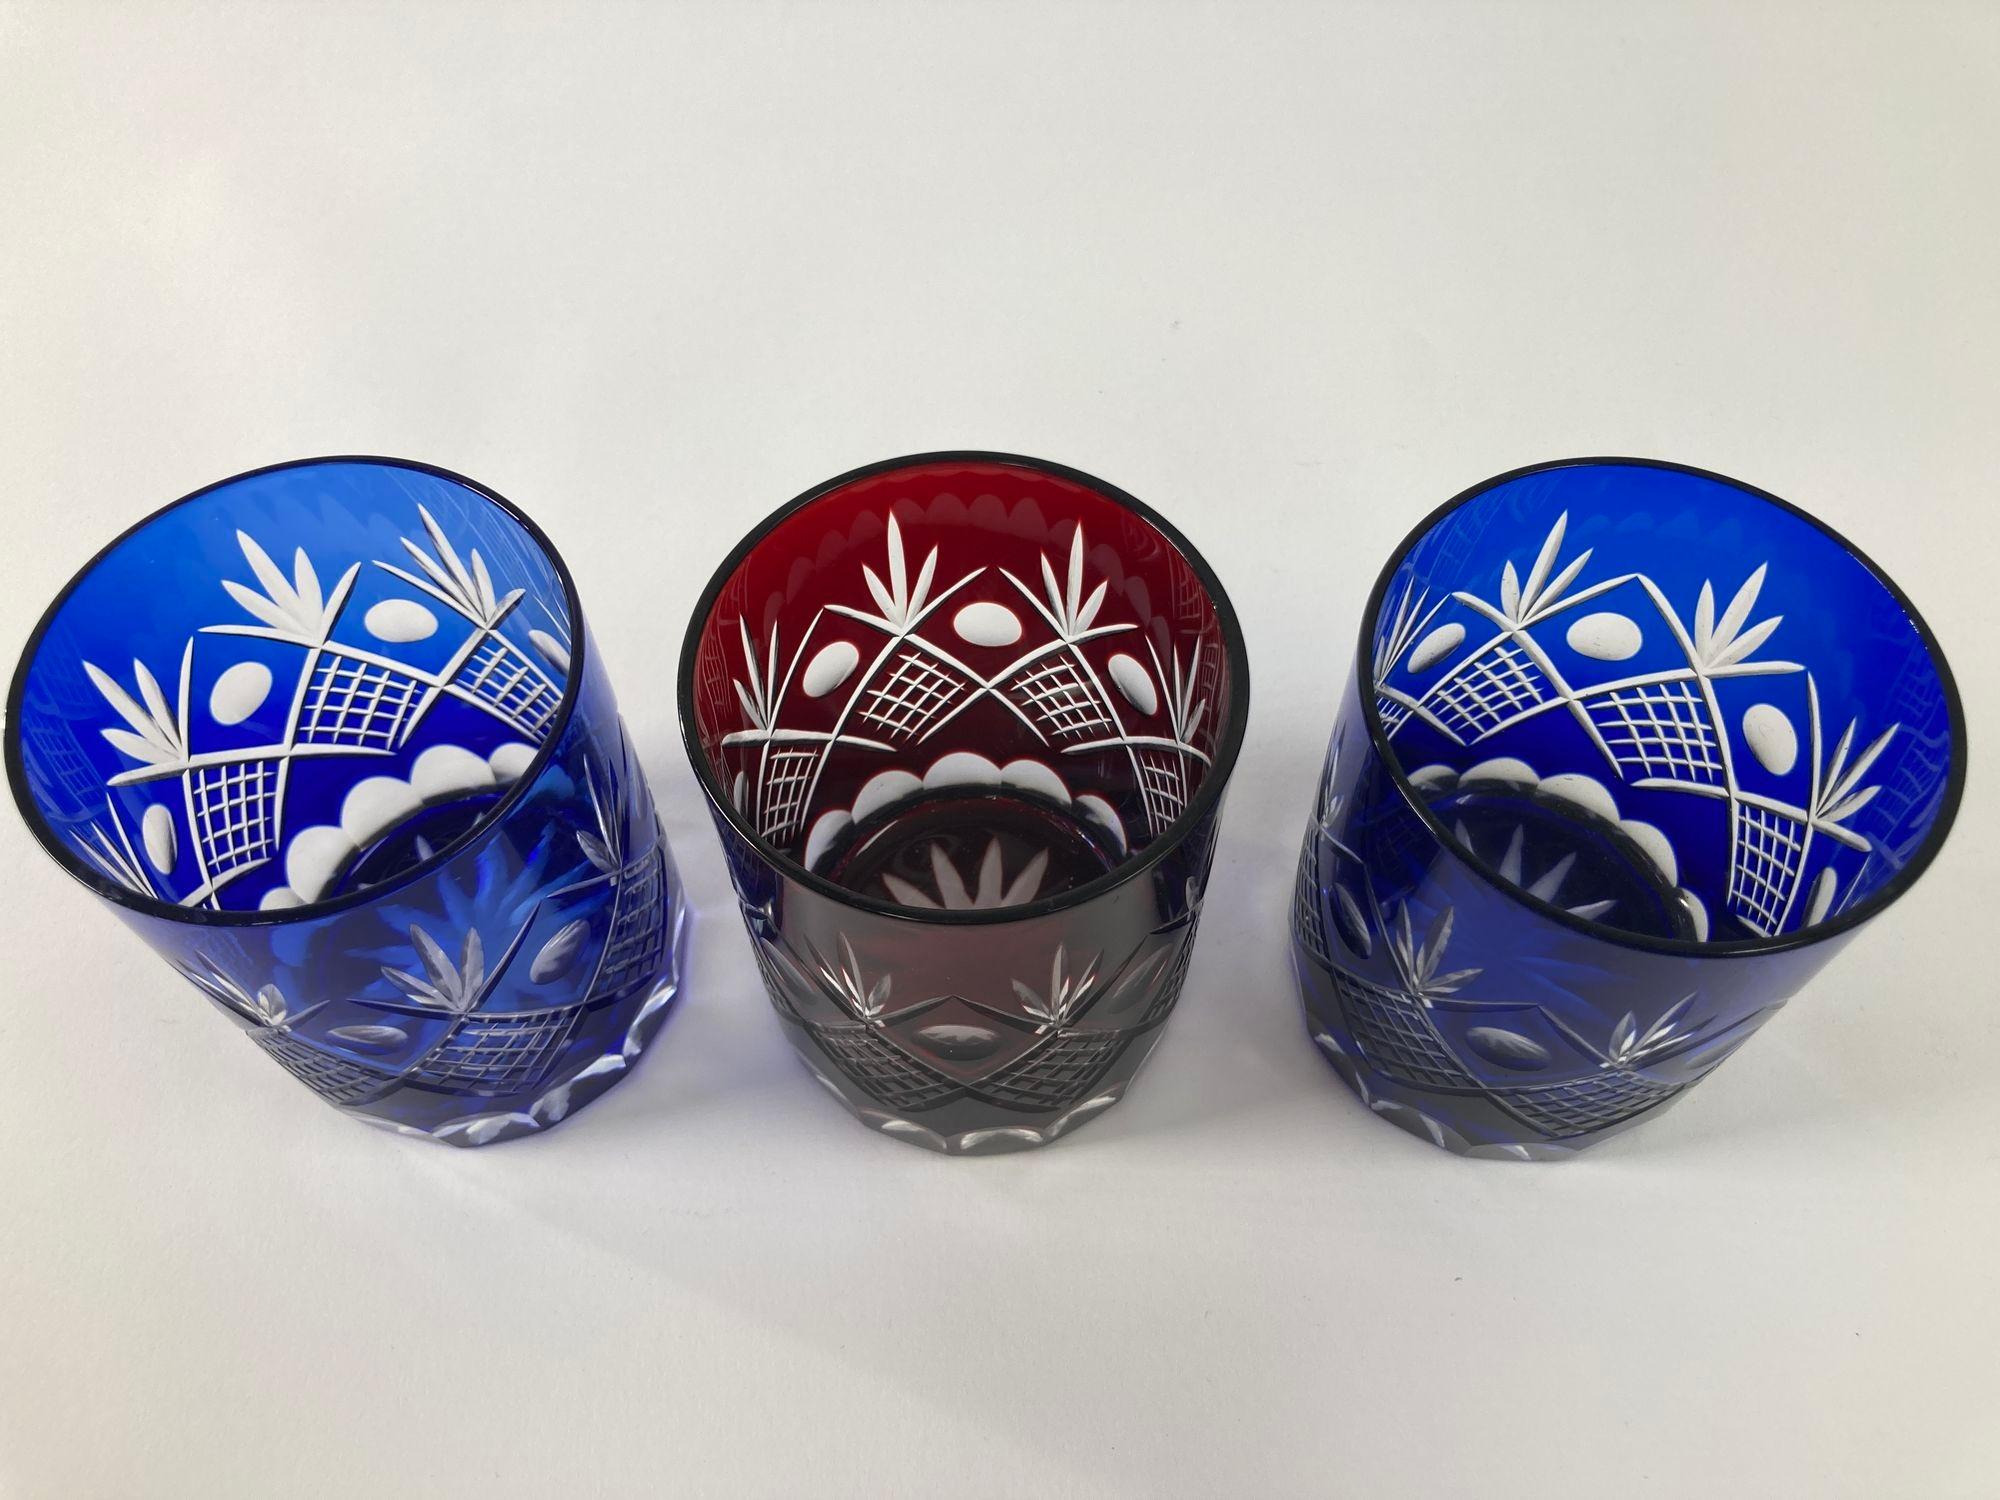 1970 Whiskey Glasses Tumbler Baccarat Style Blue and Red Cut Crystal Set of 3 For Sale 12